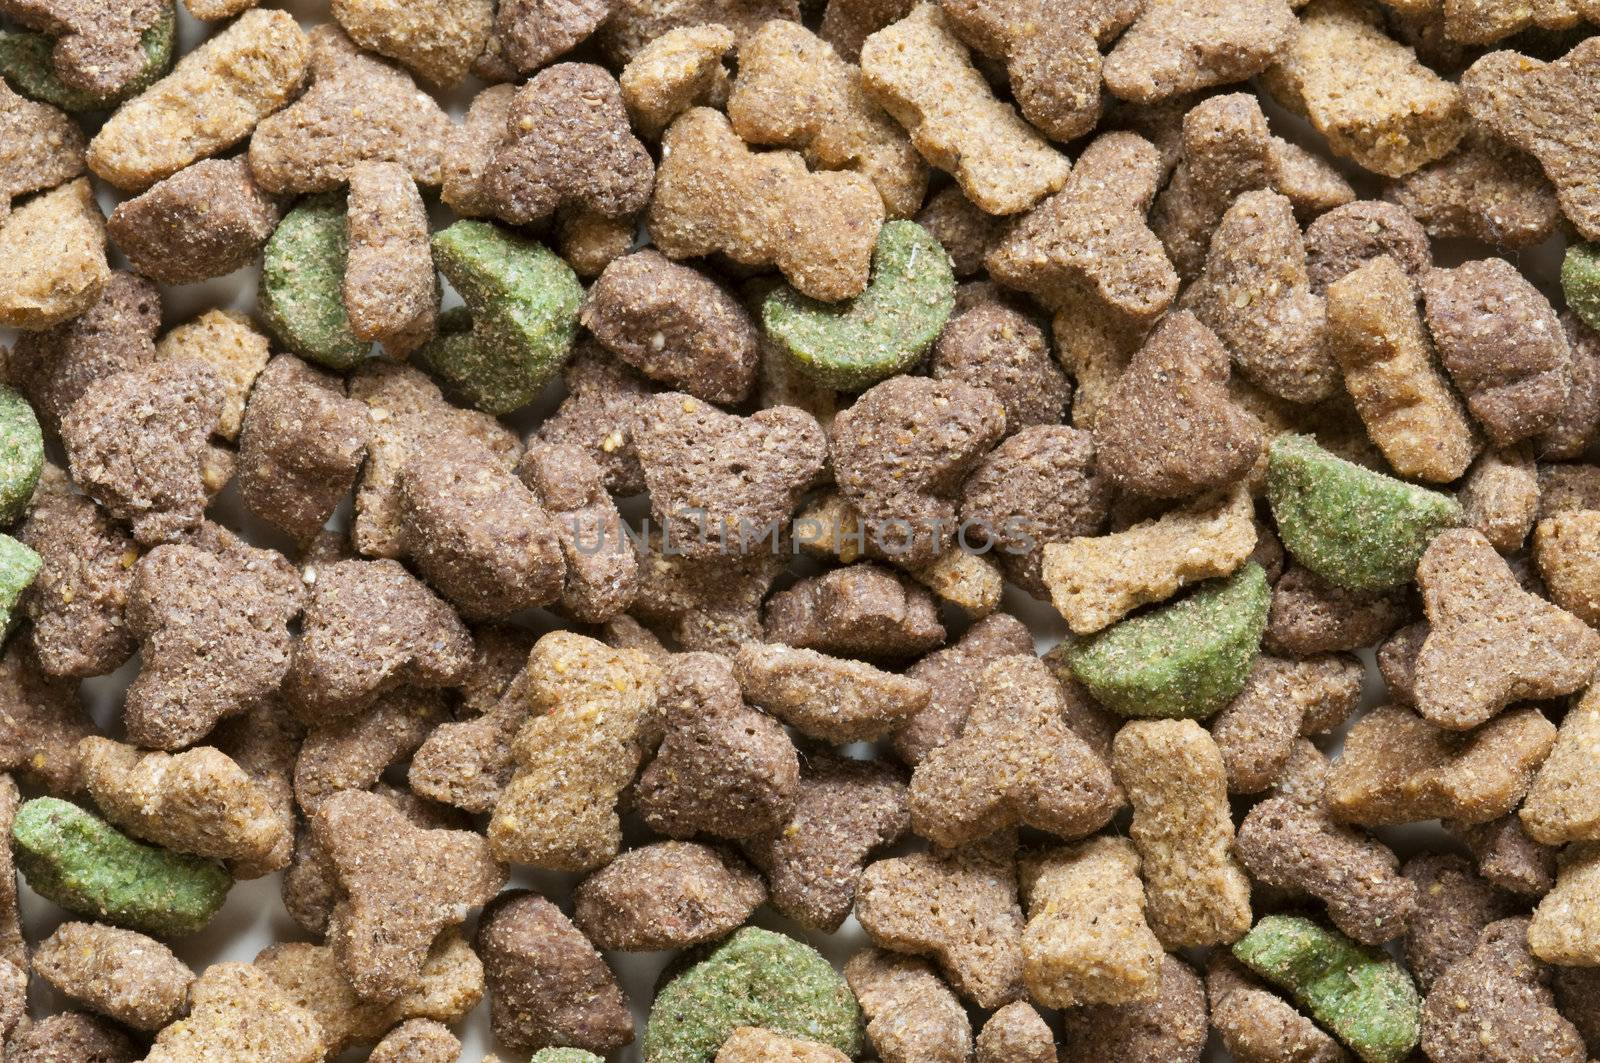 Dried pet food of many colors by AlessandroZocc